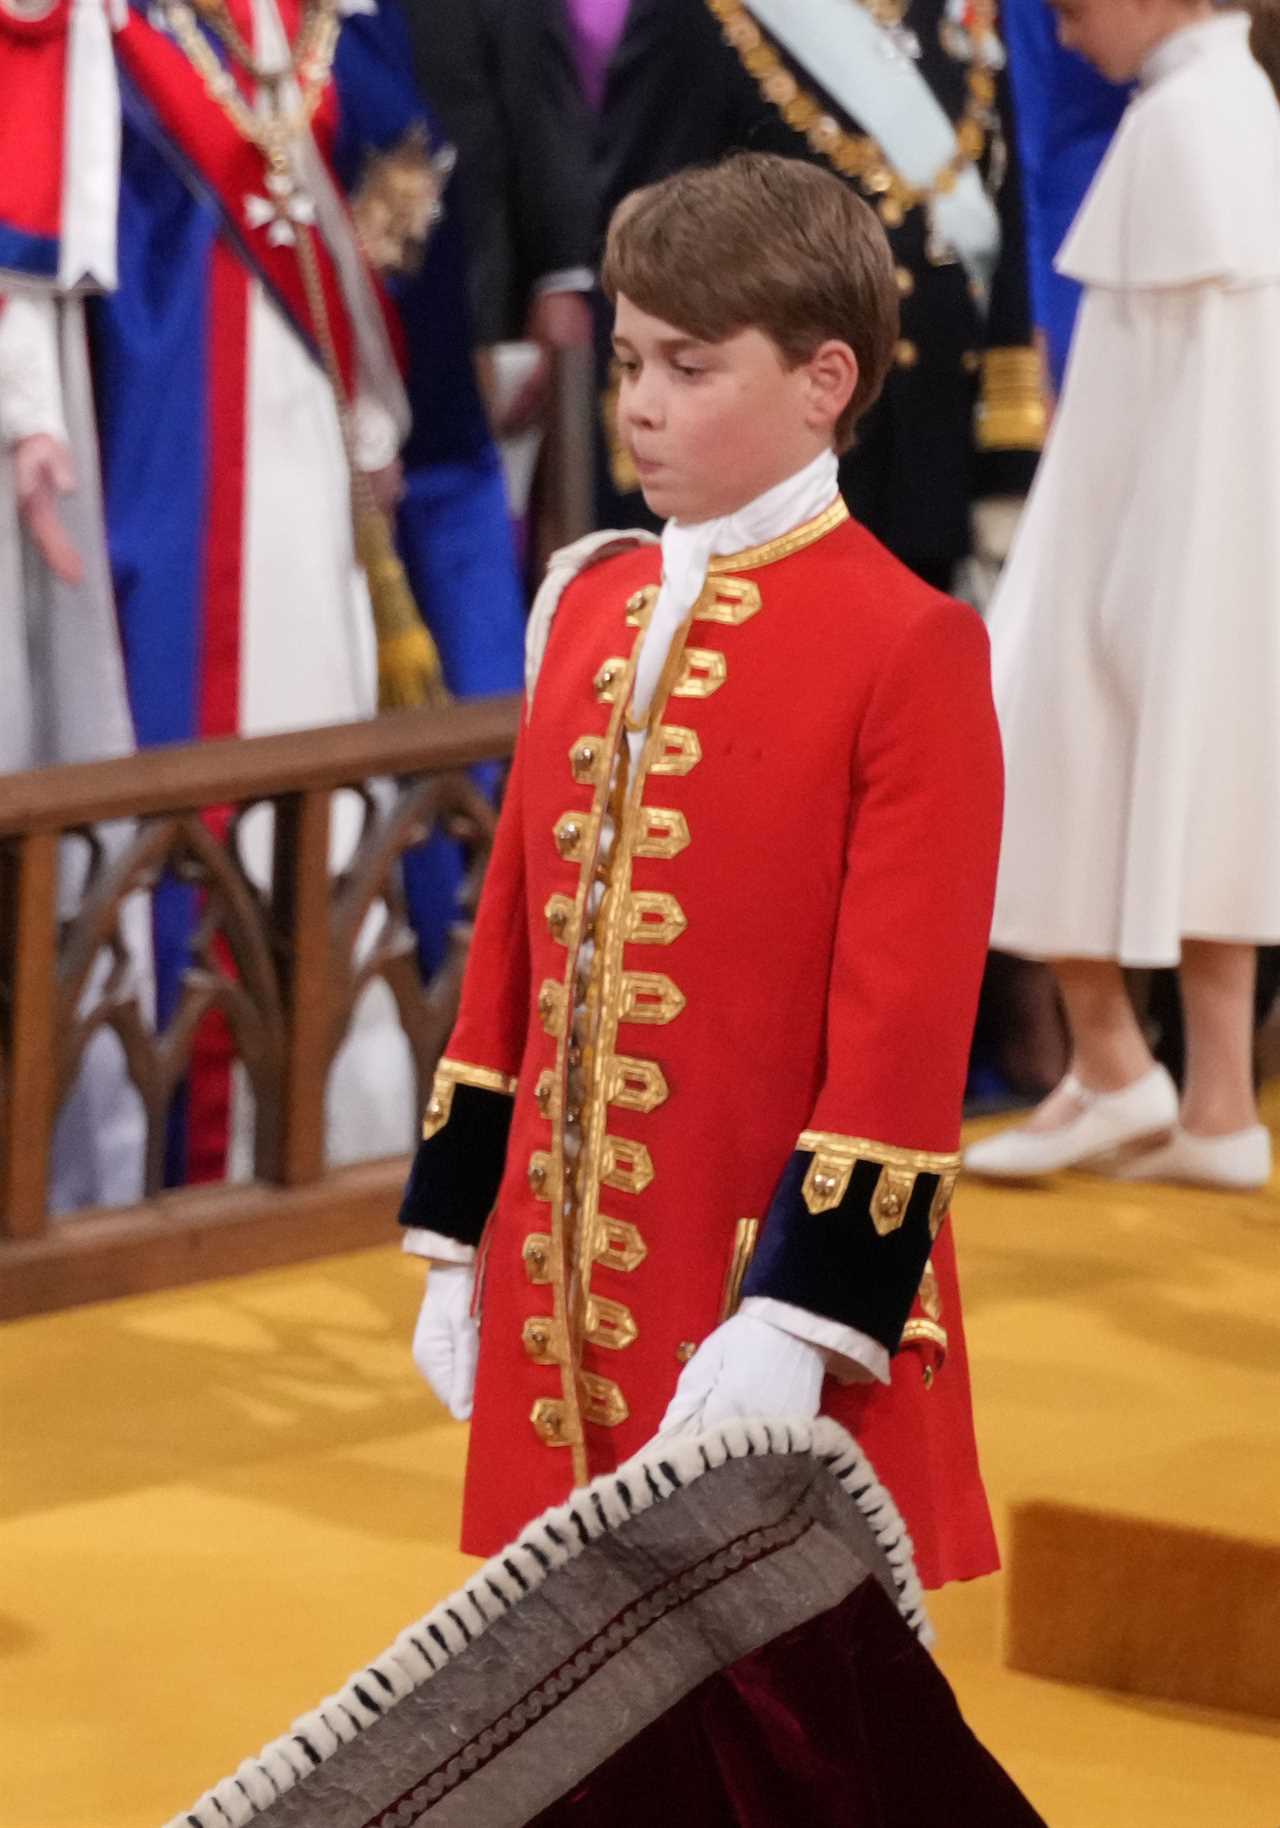 Prince George as Page of Honour at the coronation ceremony of King Charles III and Queen Camilla in Westminster Abbey, London. Picture date: Saturday May 6, 2023. PA Photo. See PA story ROYAL Coronation. Photo credit should read: Victoria Jones/PA Wire